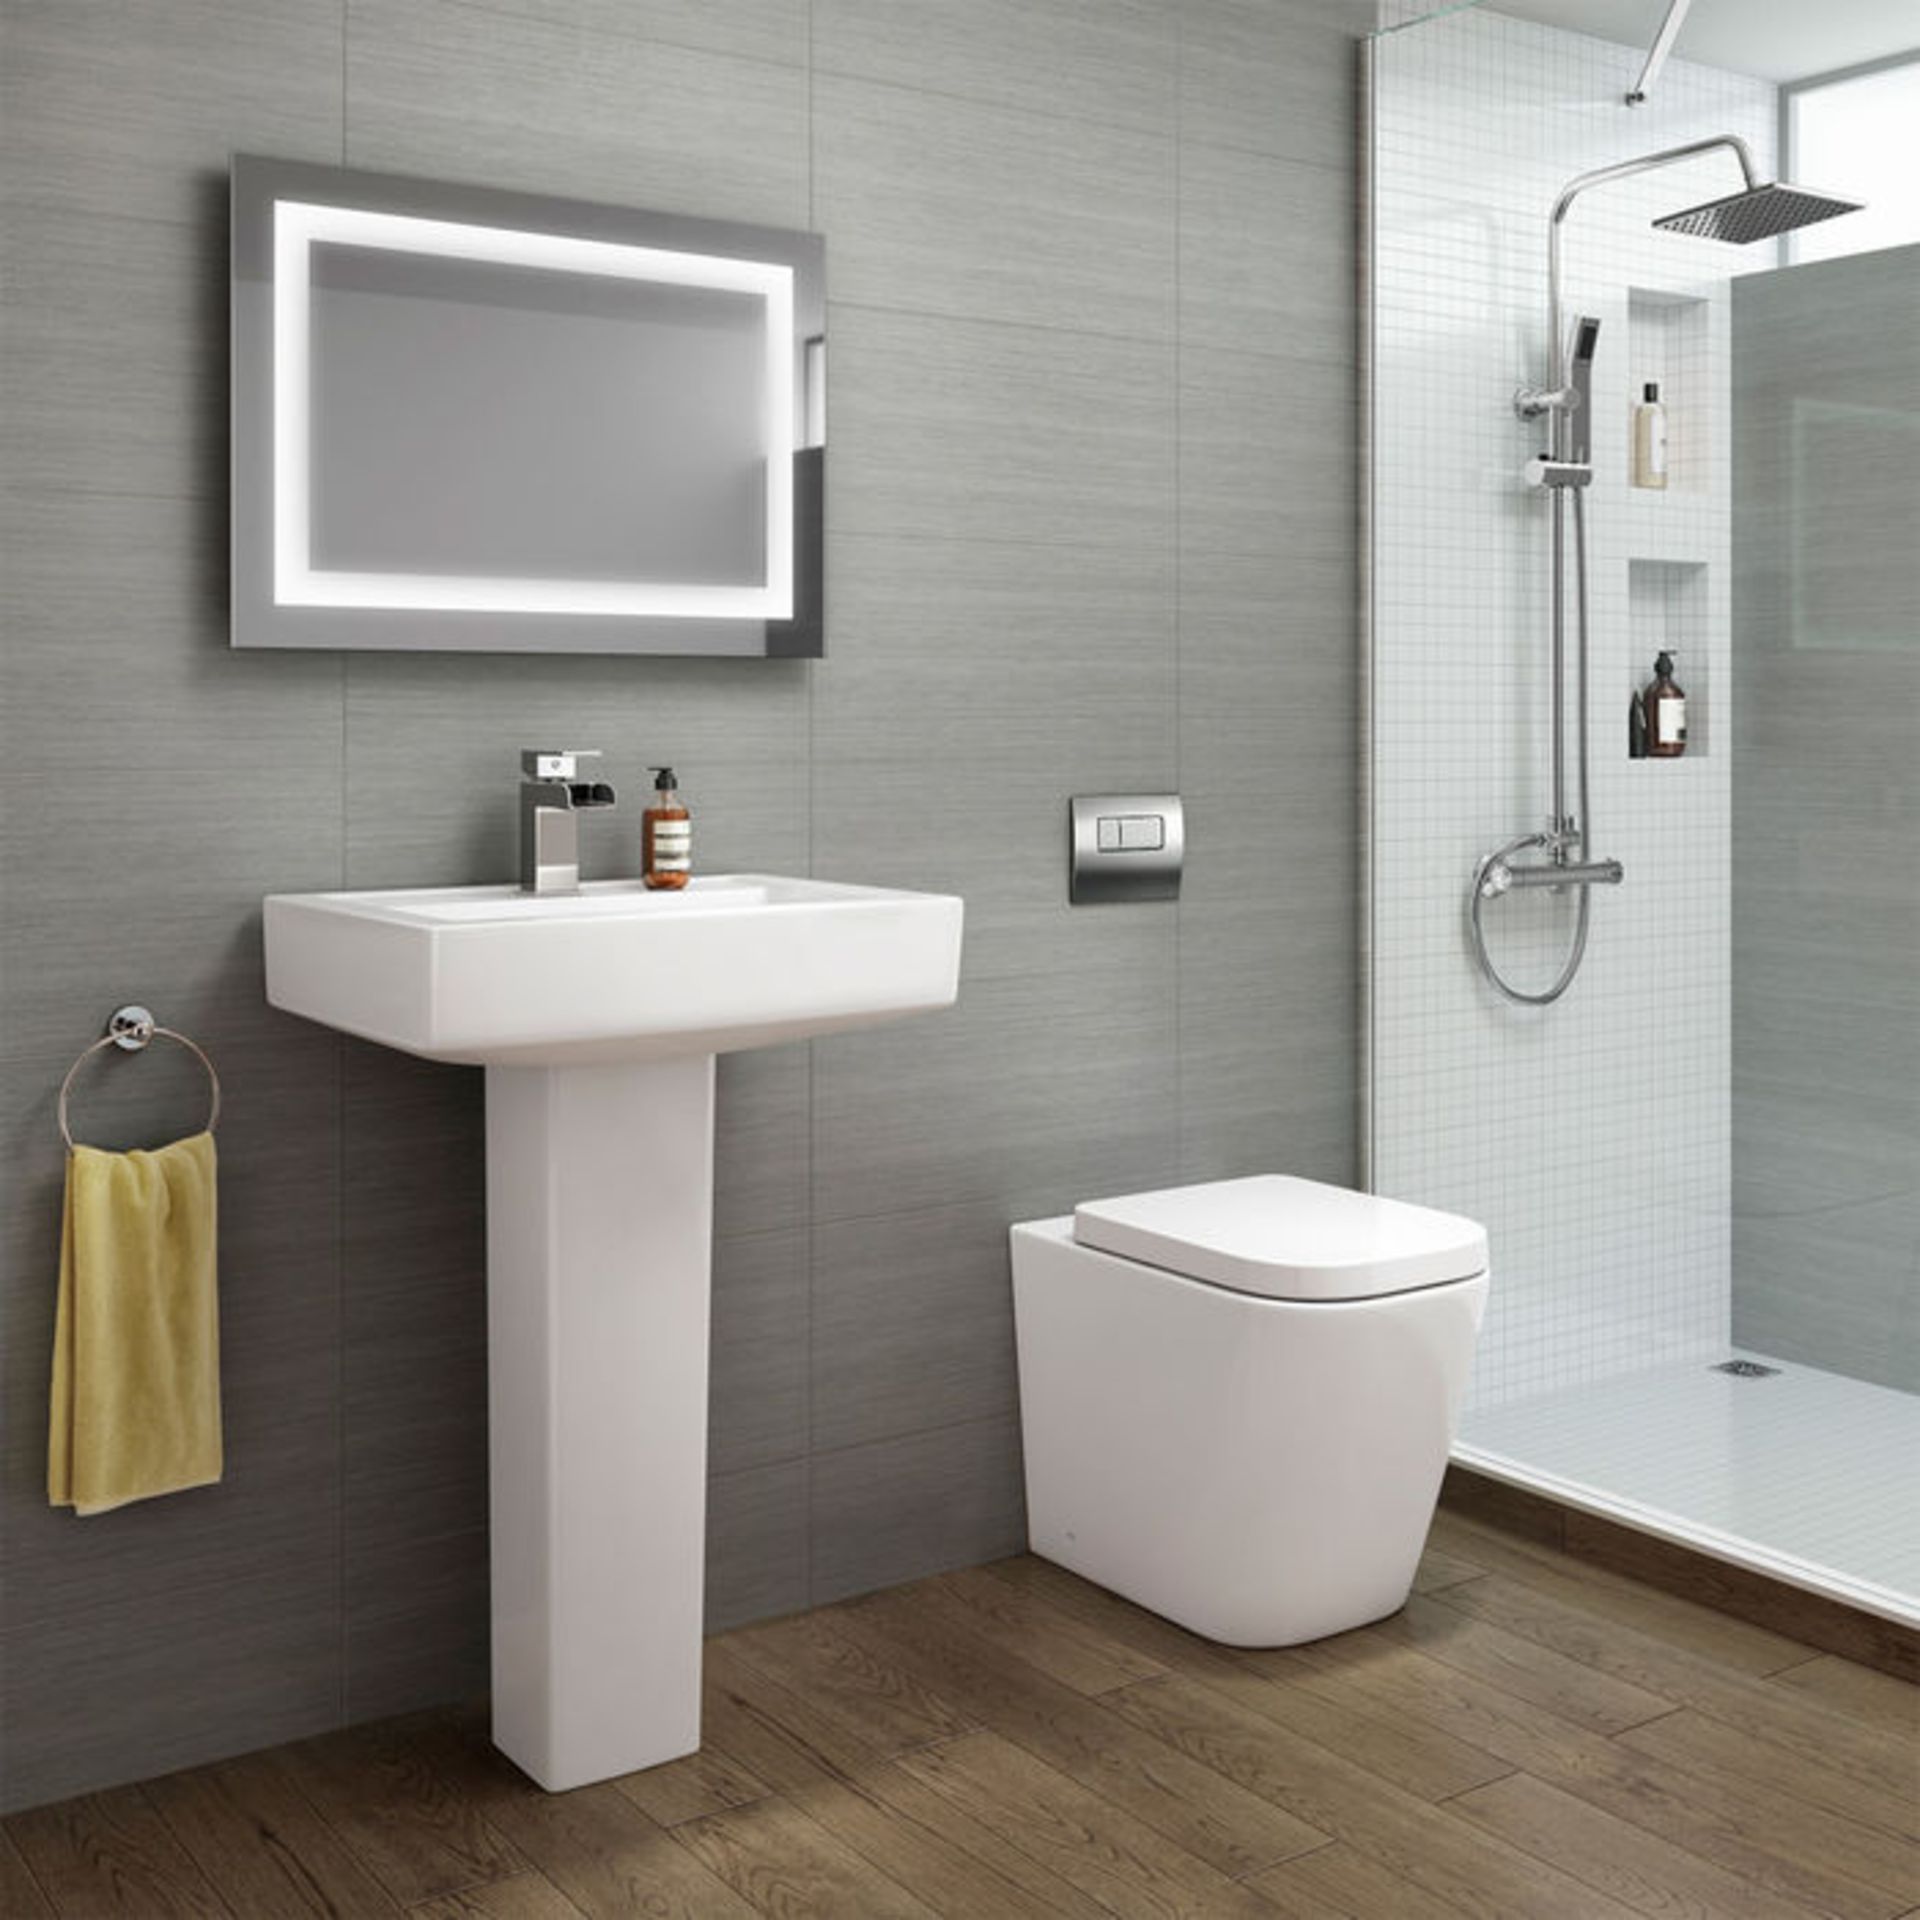 (S62) Florence Rimless Back to Wall Toilet inc Luxury Soft Close Seat RRP £349.99 Rimless design - Image 2 of 3